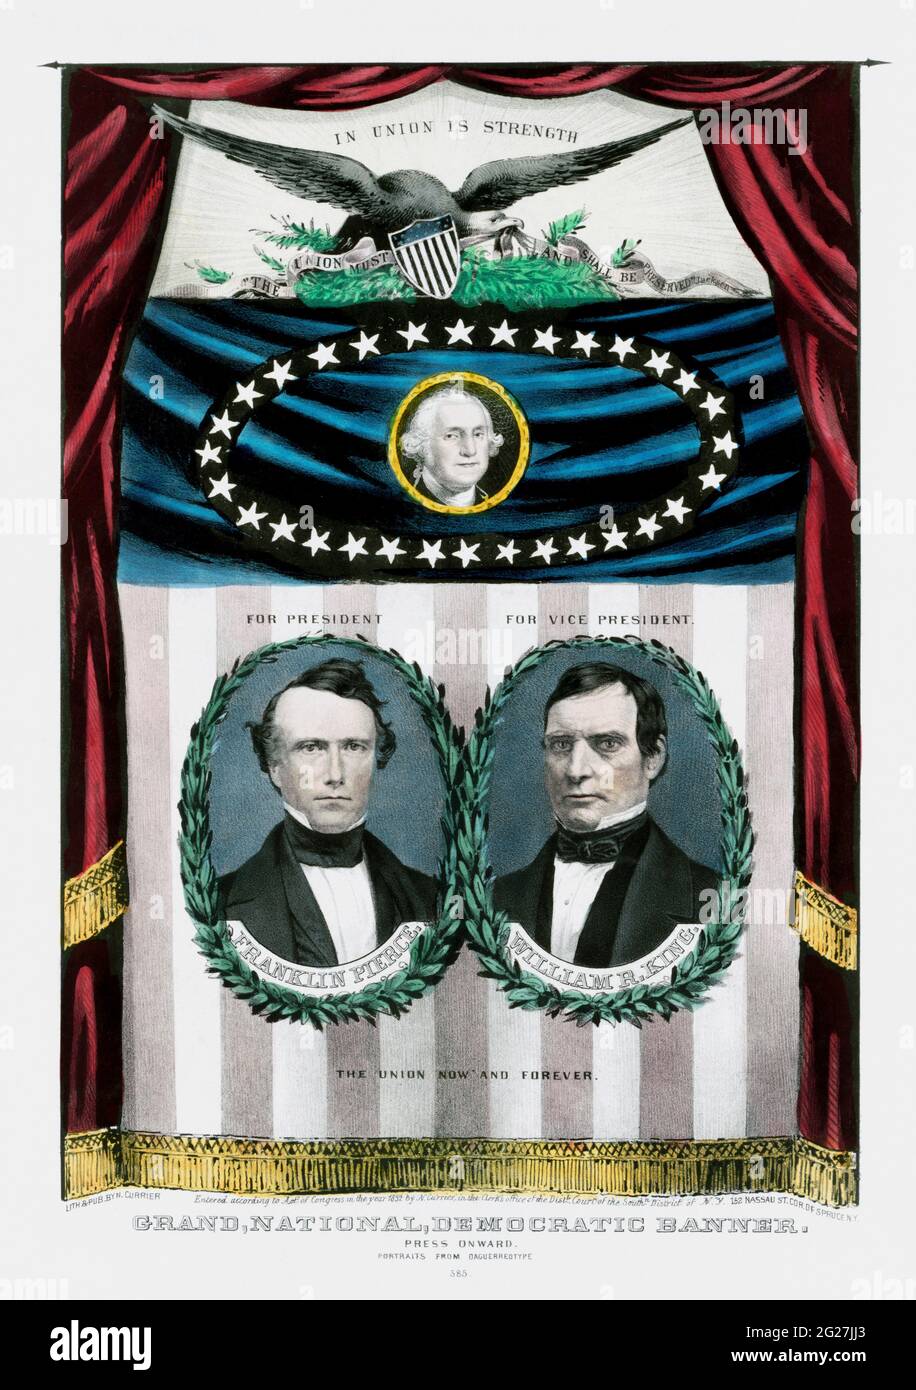 19th century history print of Democratic presidential candidates Franklin Pierce and William R. King. Stock Photo